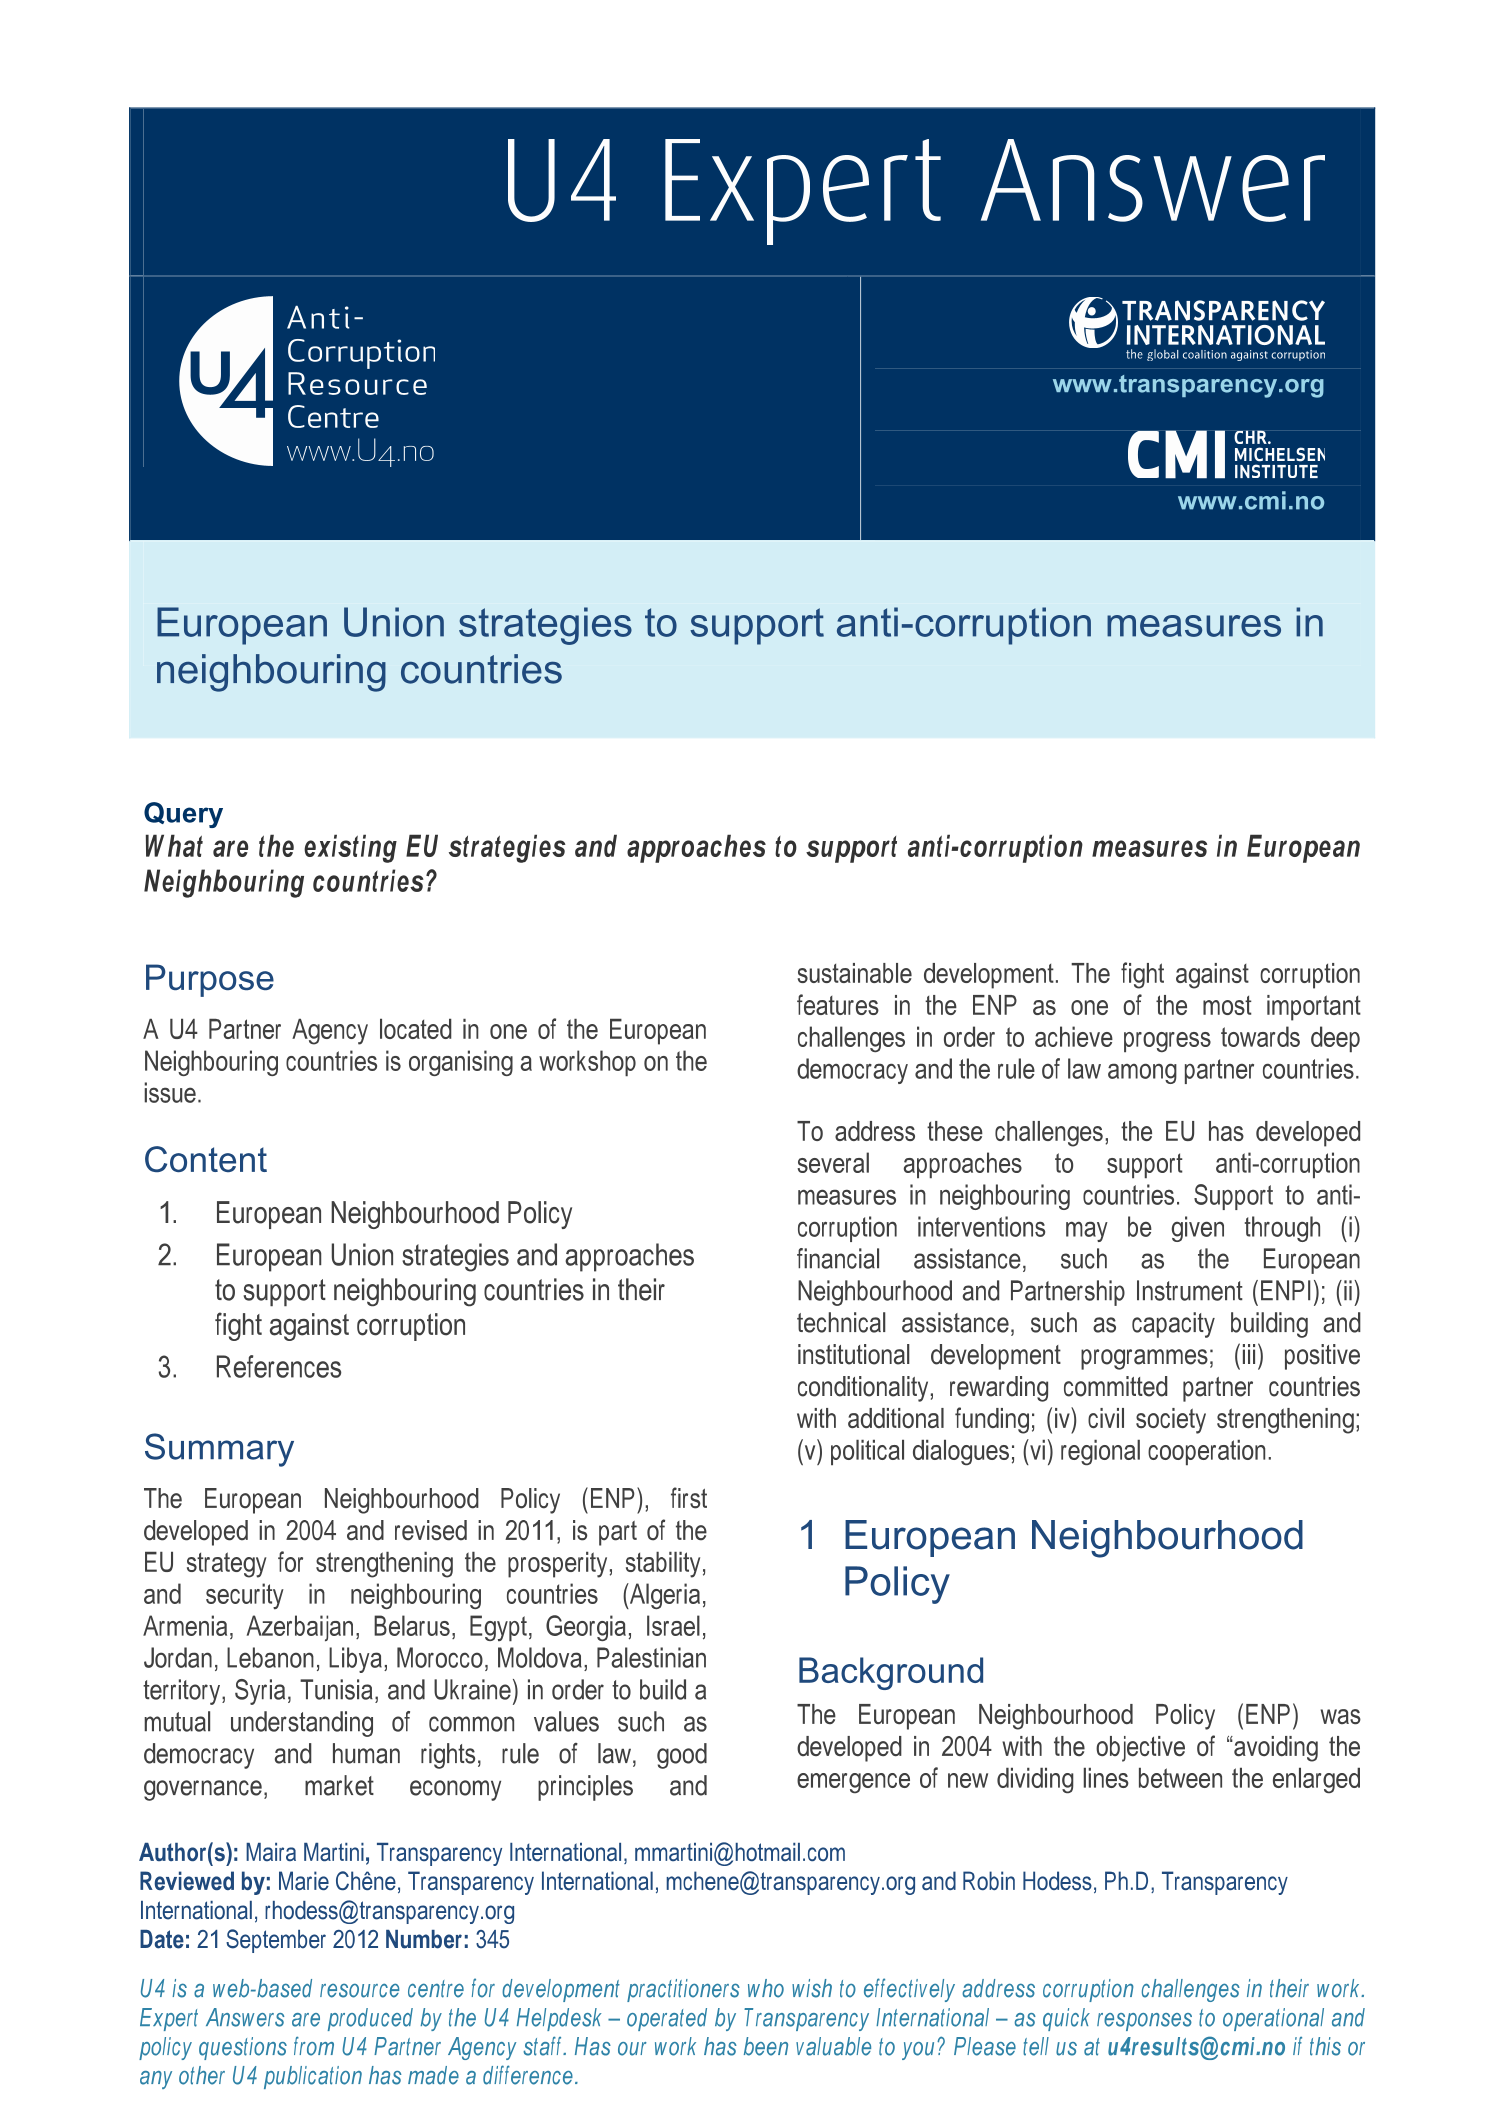 European Union strategies to support anti-corruption measures in neighbouring countries